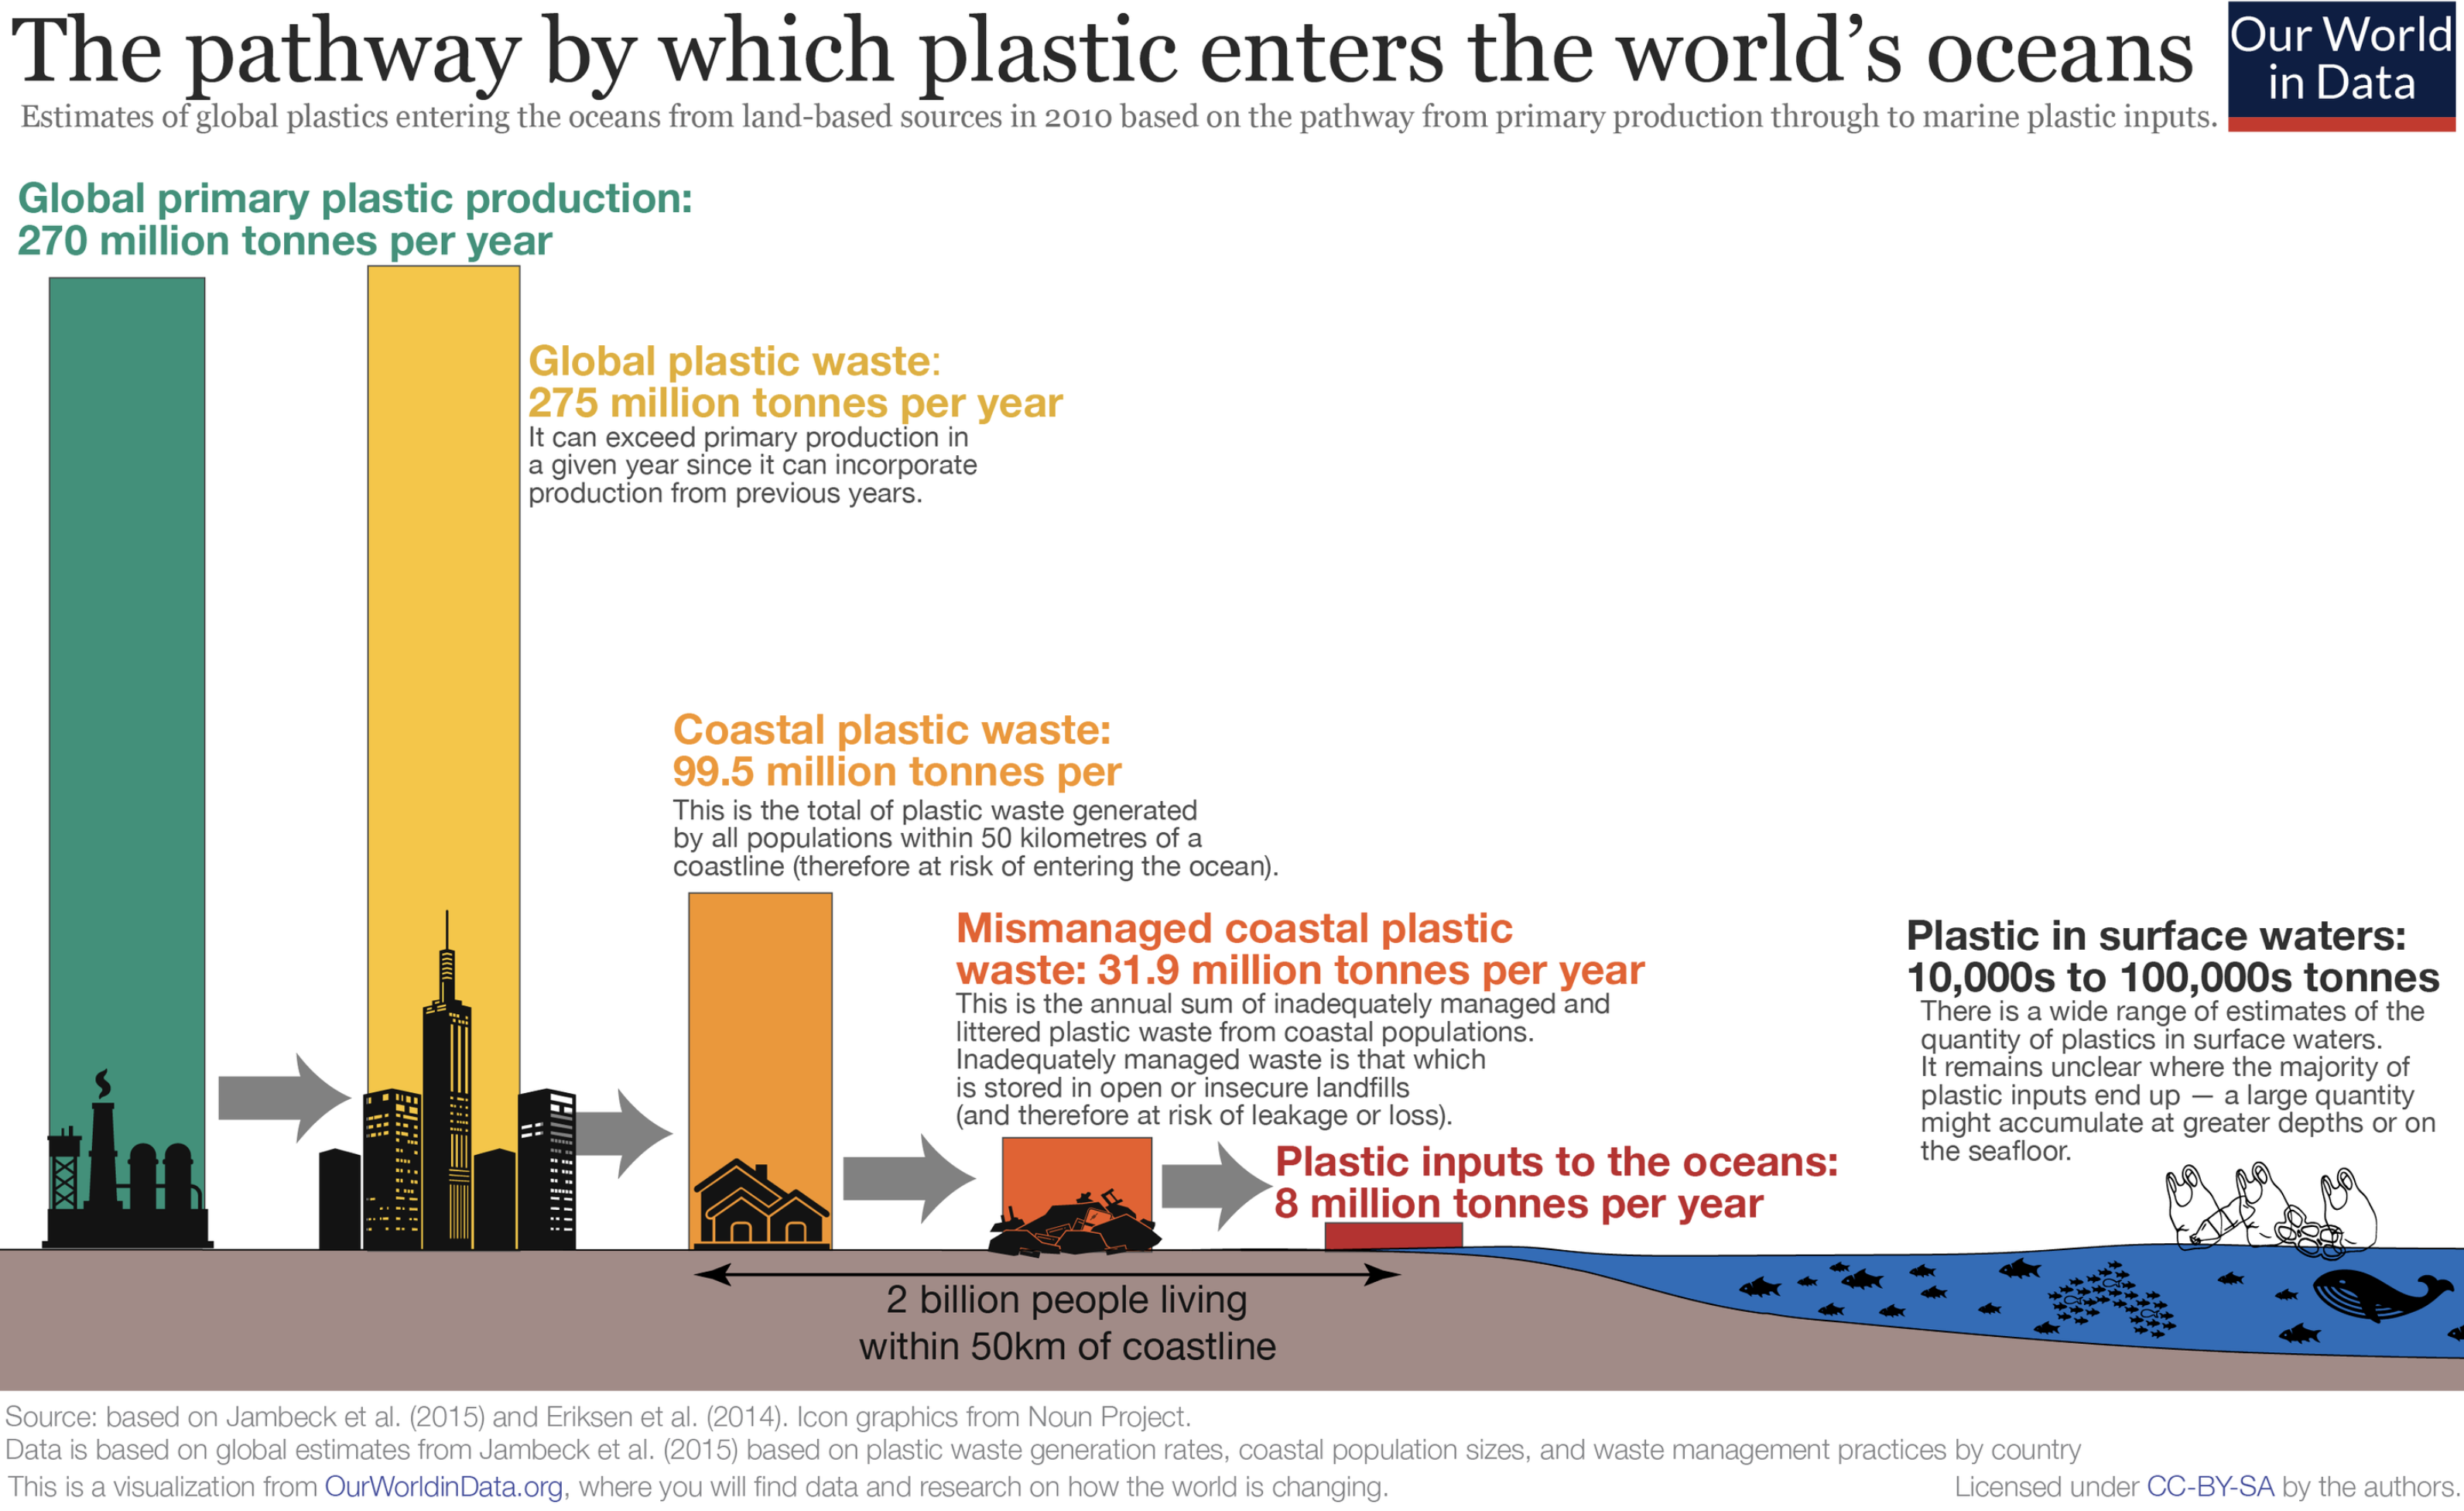 Bar graph showing the pathway of plastic (in millions of tonnes per year) into the ocean.